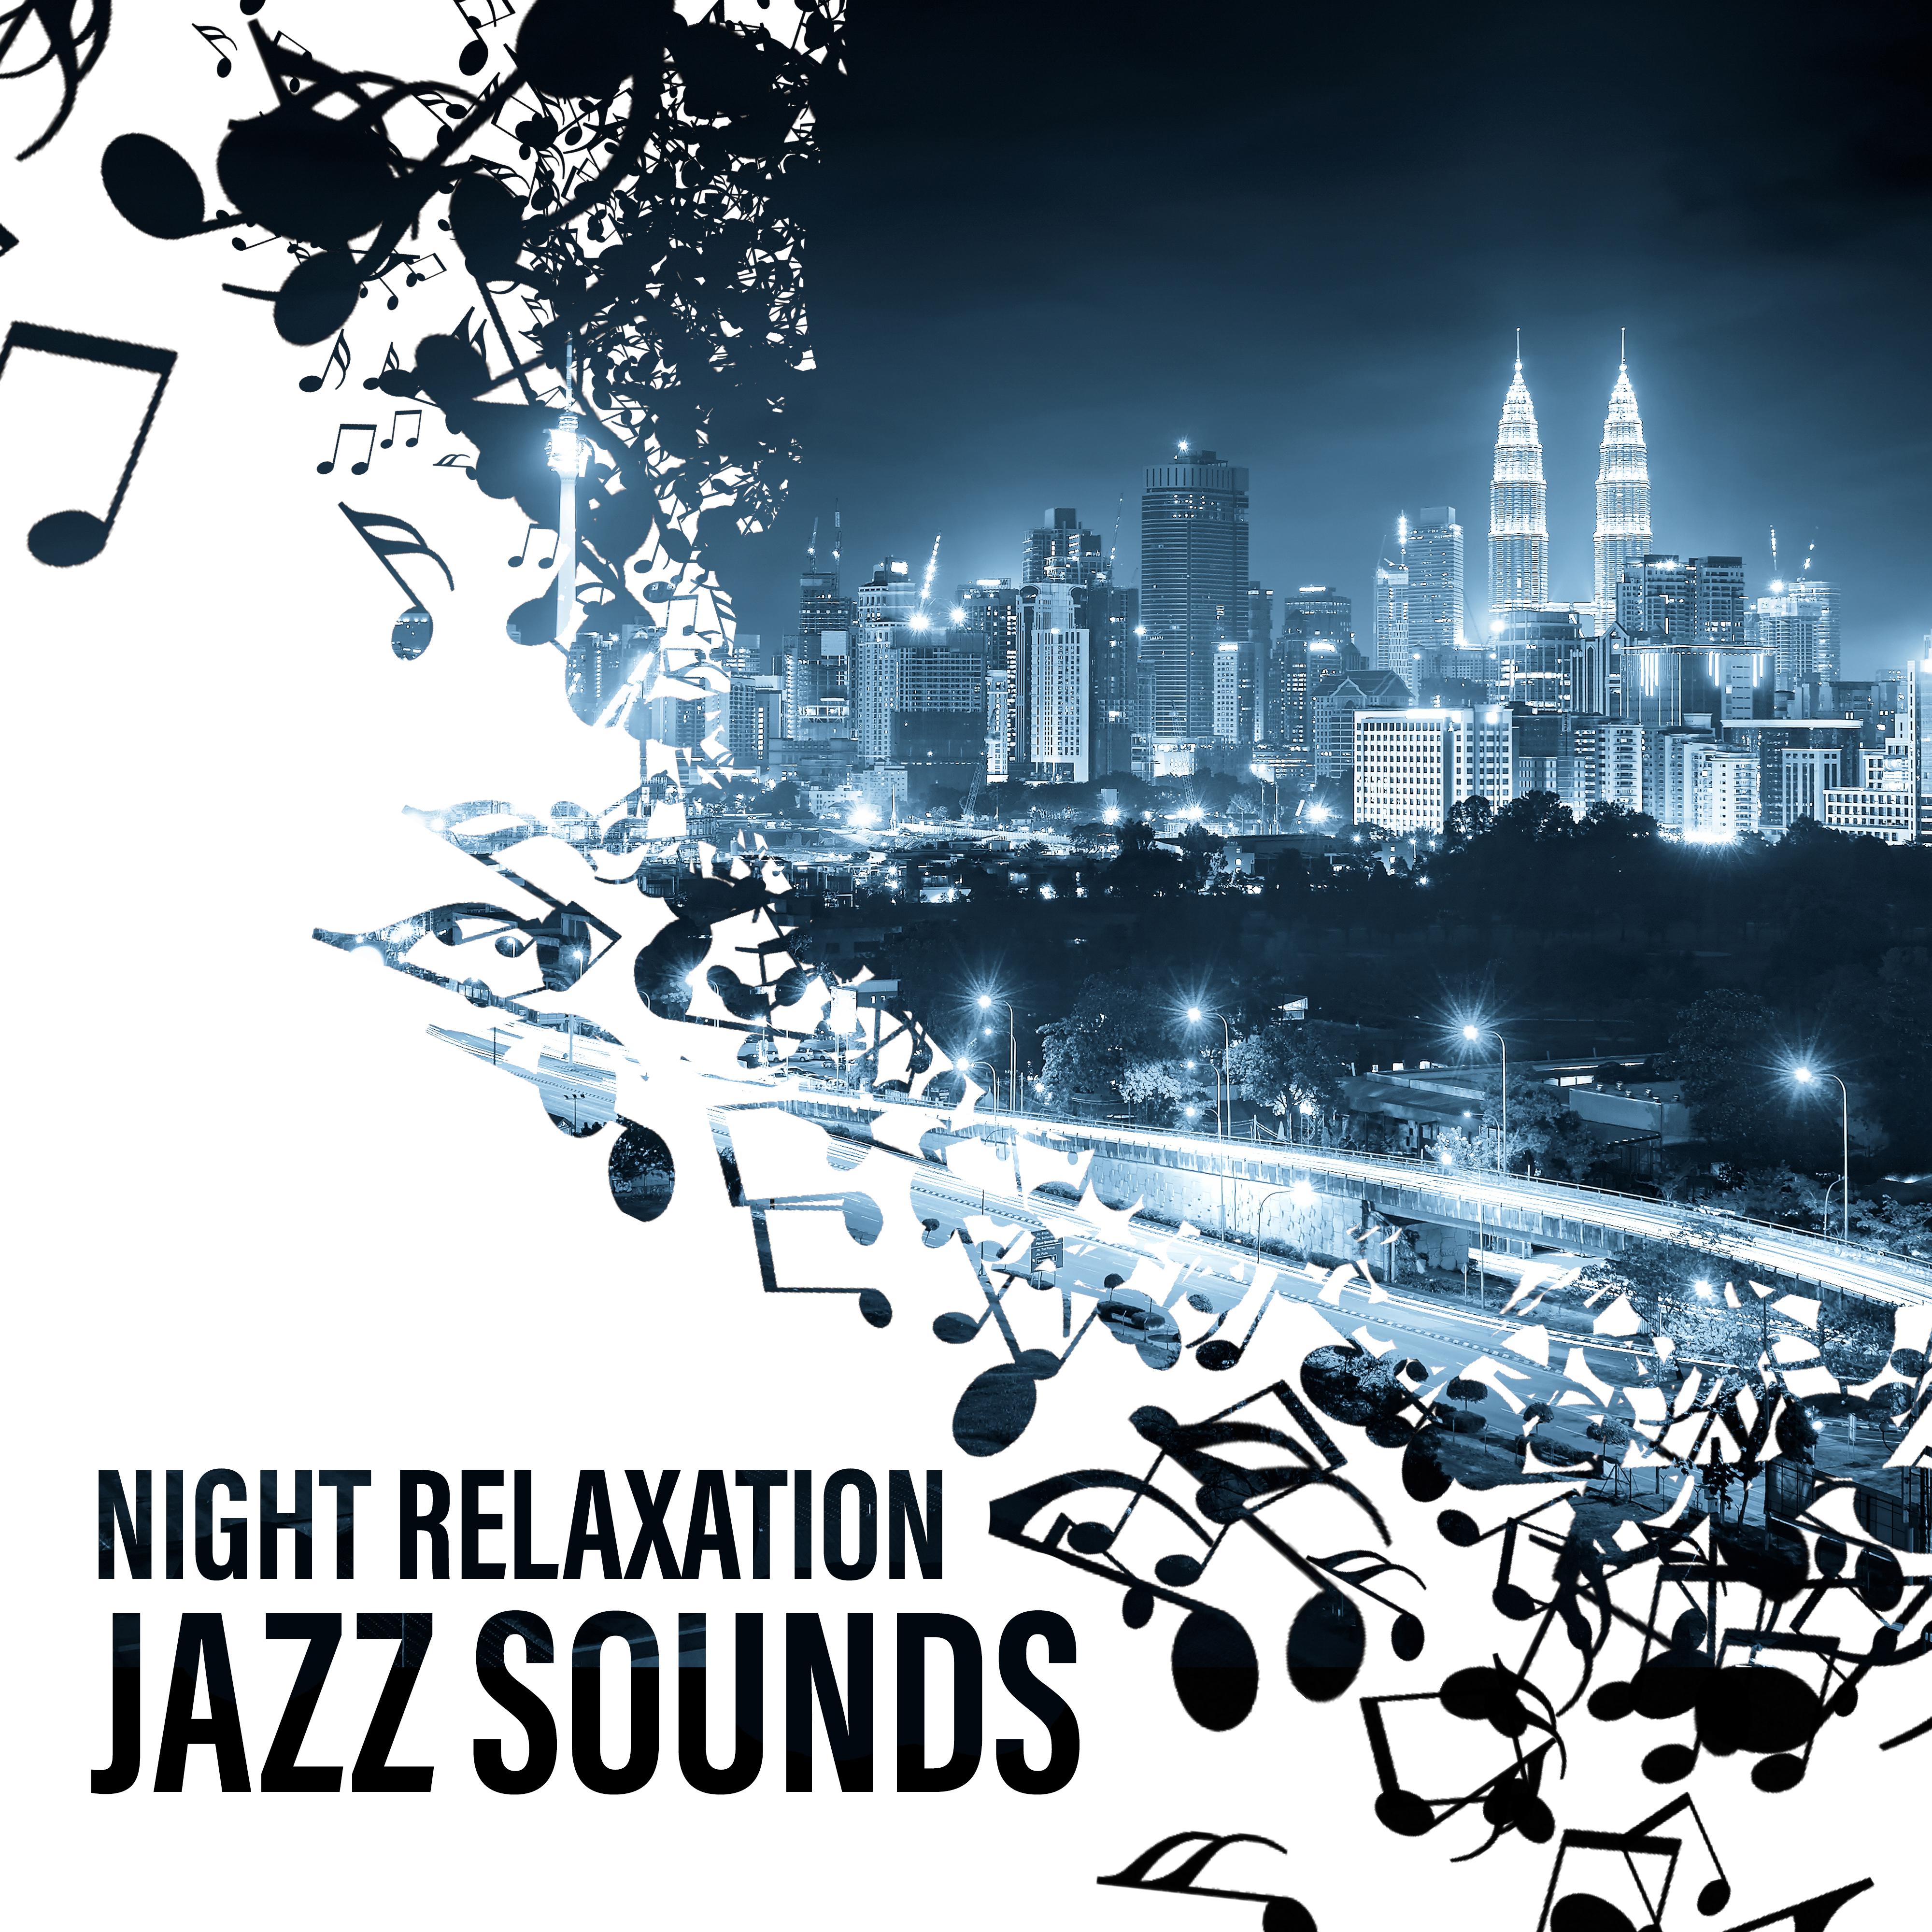 Night Relaxation Jazz Sounds